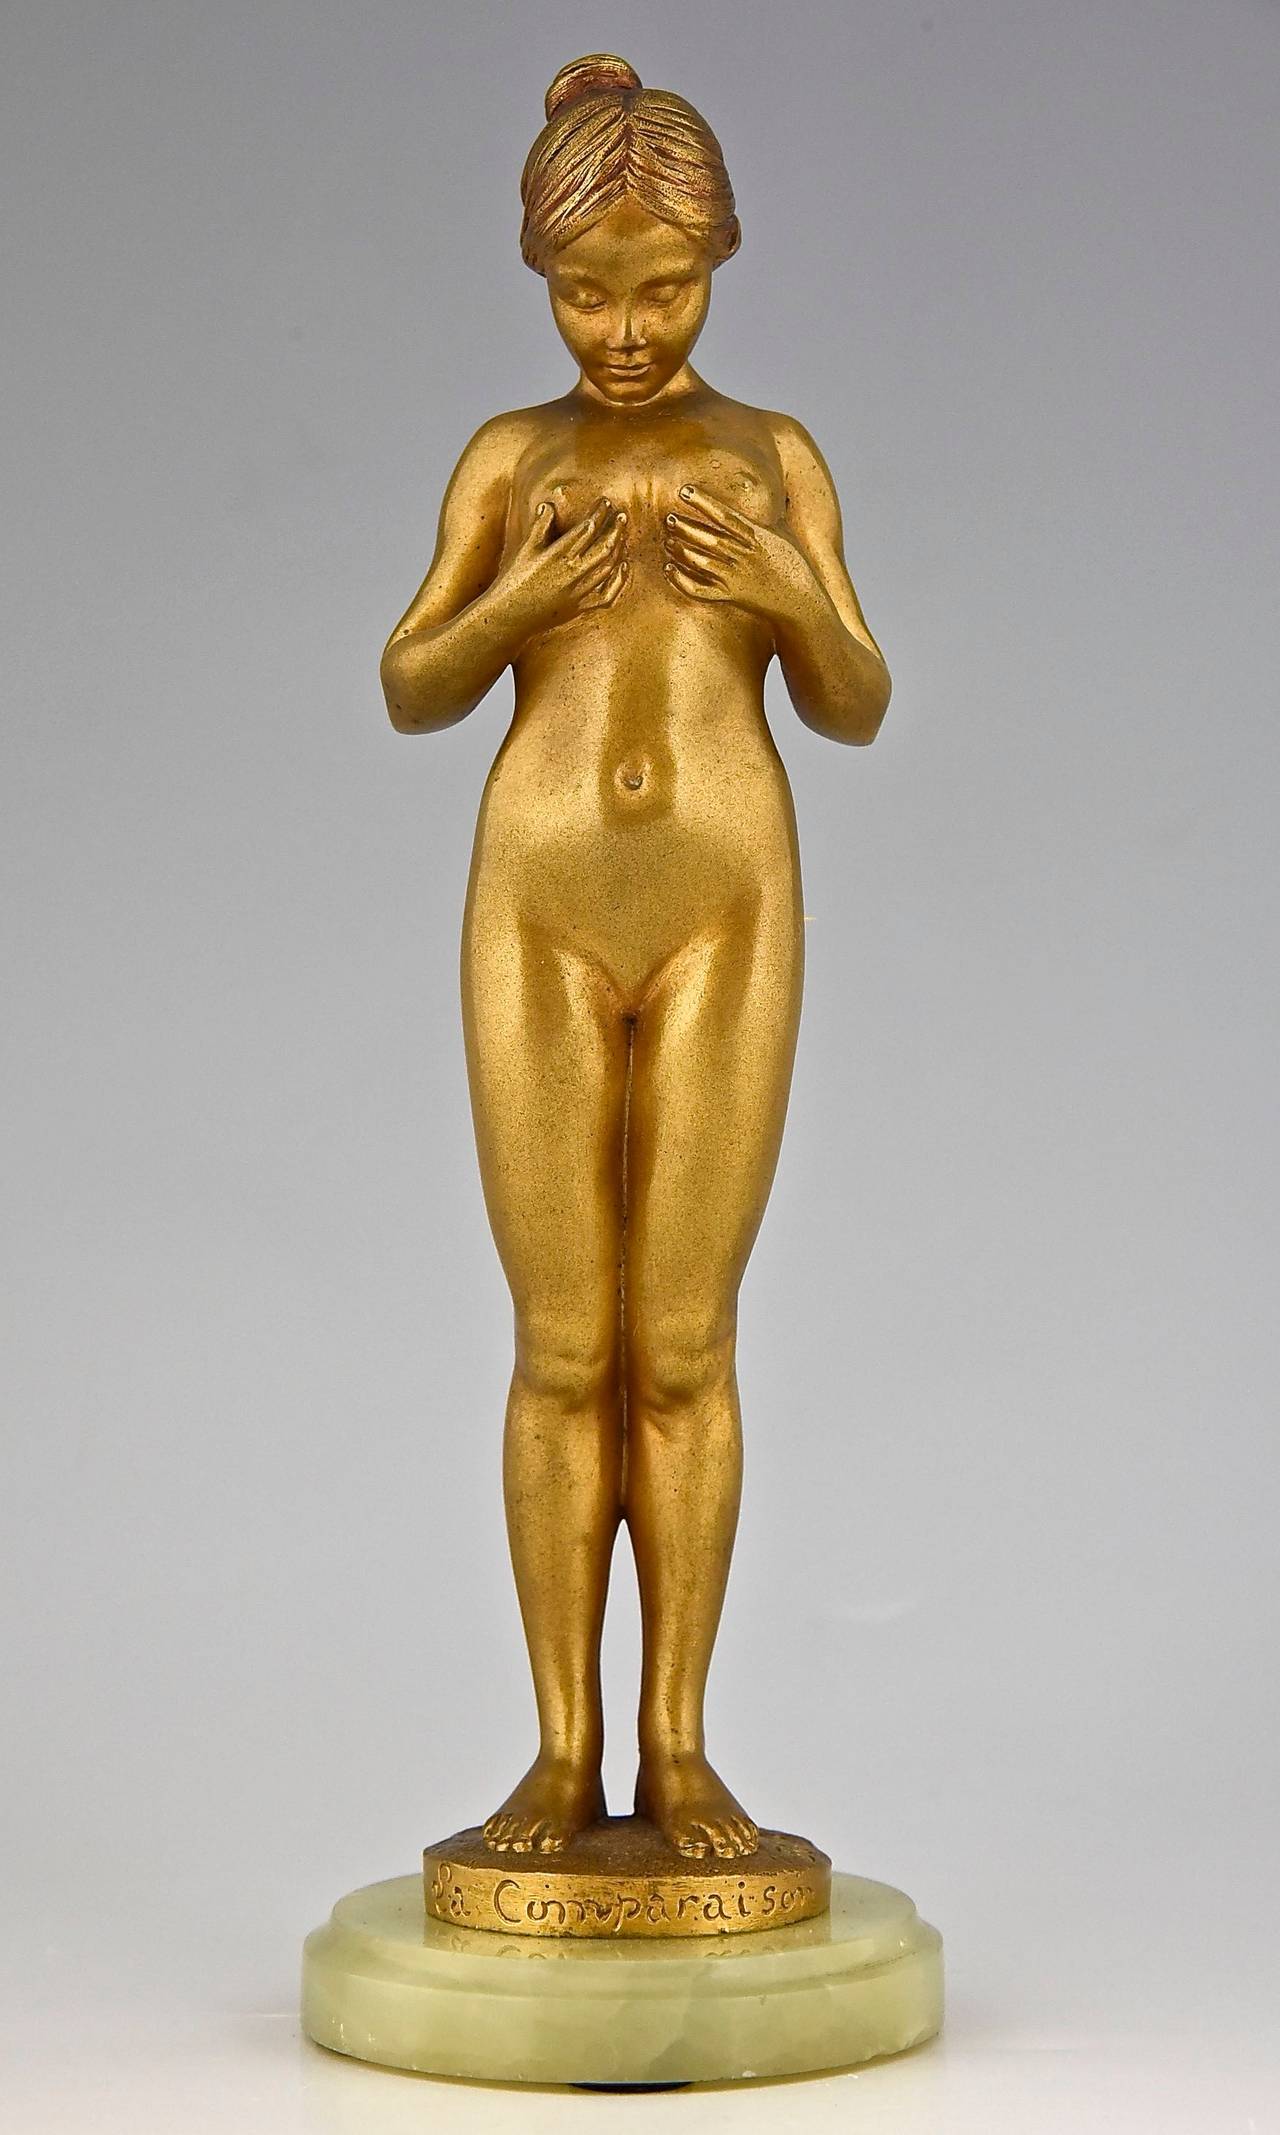 “La comparaison”. 
A bronze of a young girl comparing her breasts. 
By Antoine Bofill.
Worked in France 1895-1925.
Signature & Marks:  Bofill.  Patrouiileau éditeur, Paris.  Bronze. 
Style:  Art Nouveau. 
Date:  1905. 
Material:  Gilt bronze.